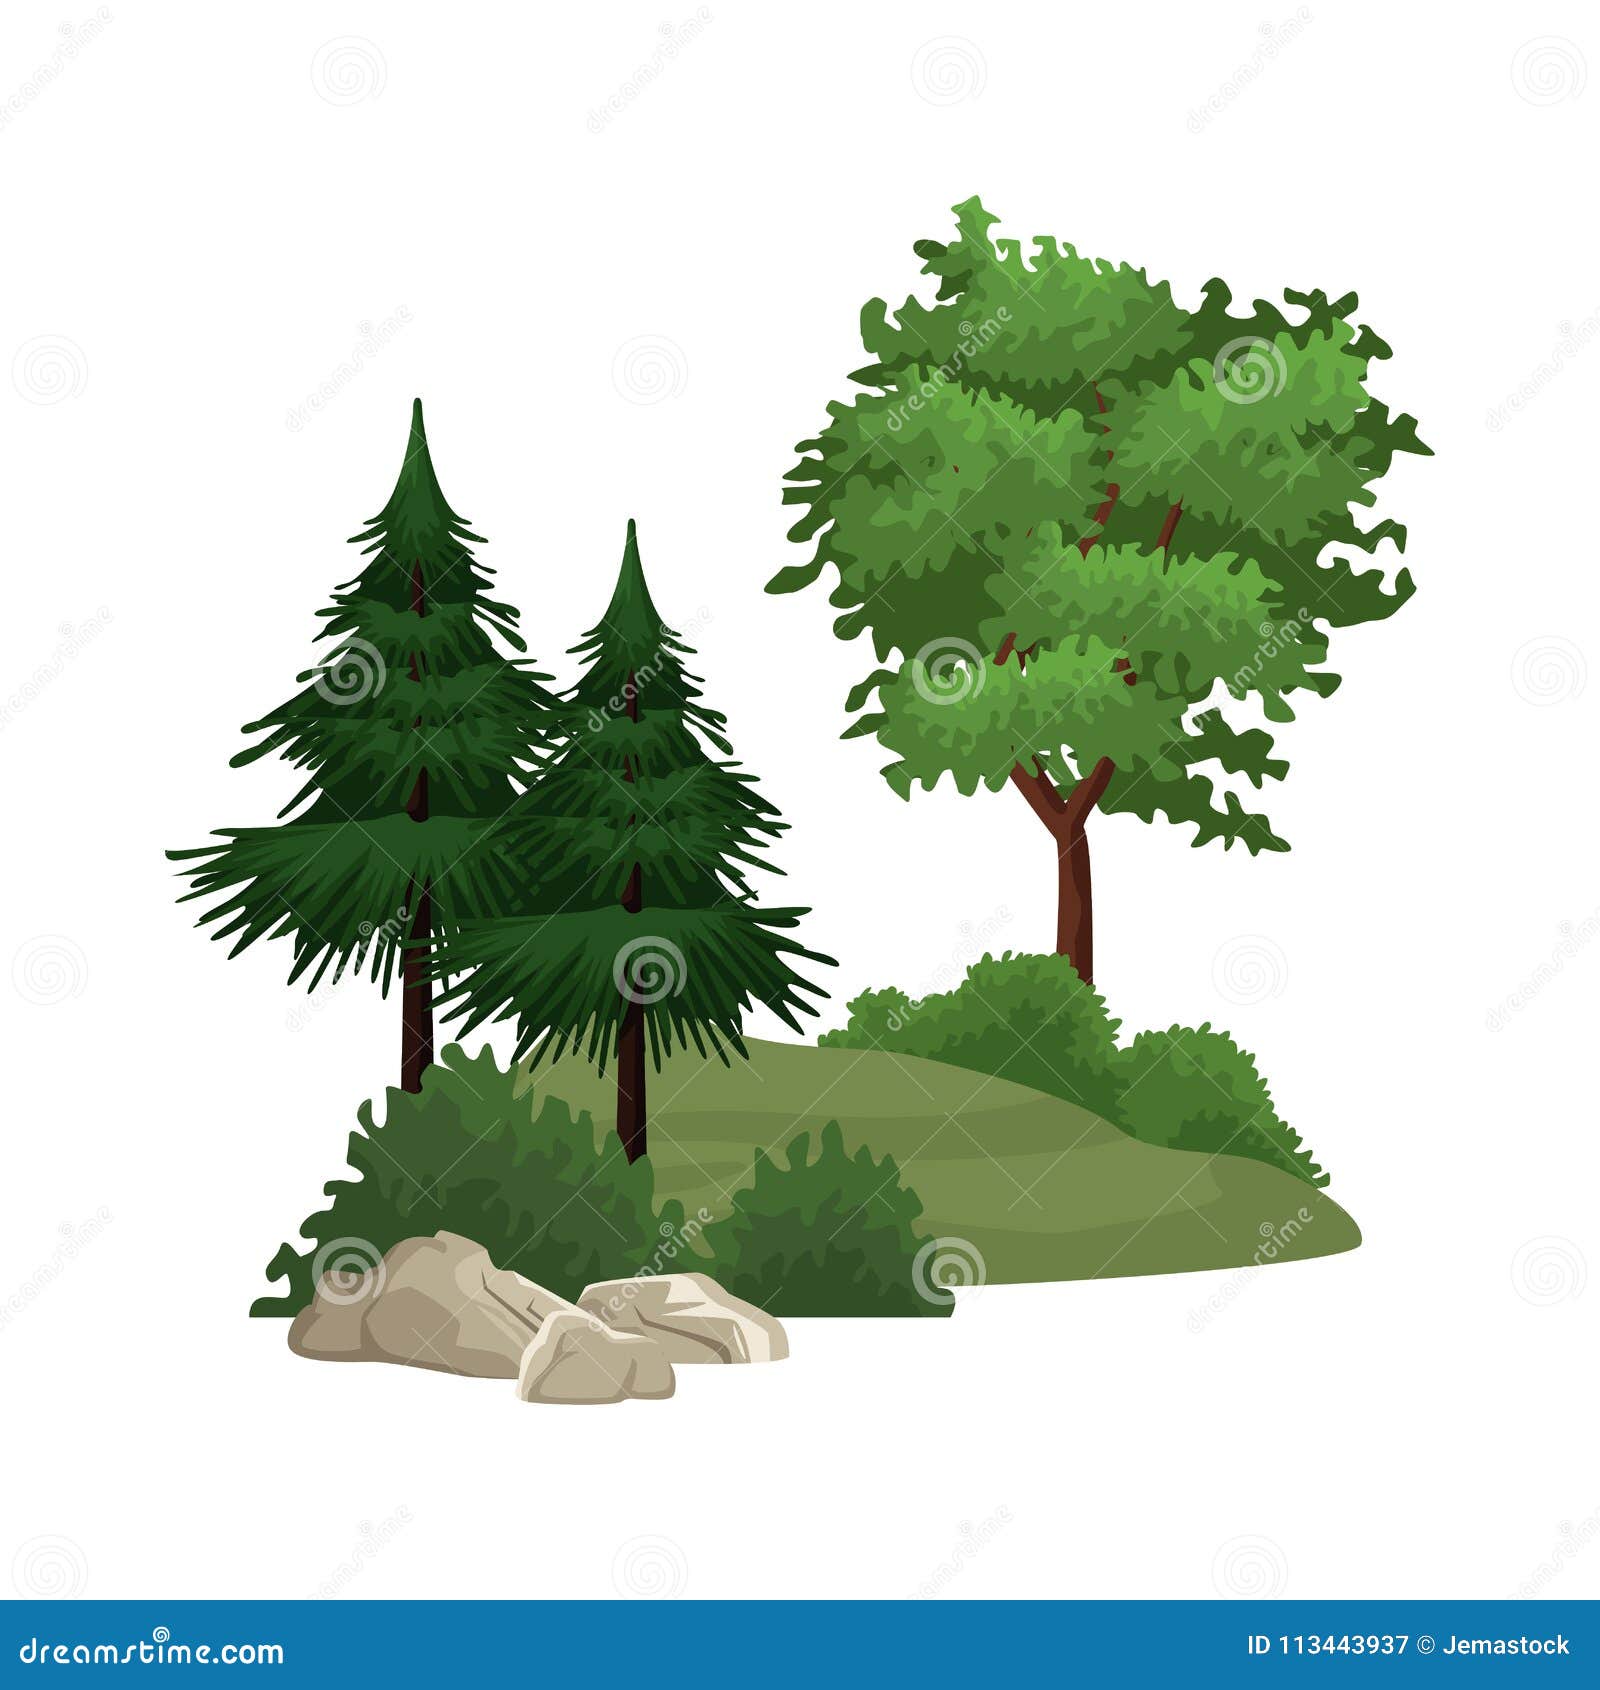 Trees and bushes stock vector. Illustration of green - 113443937